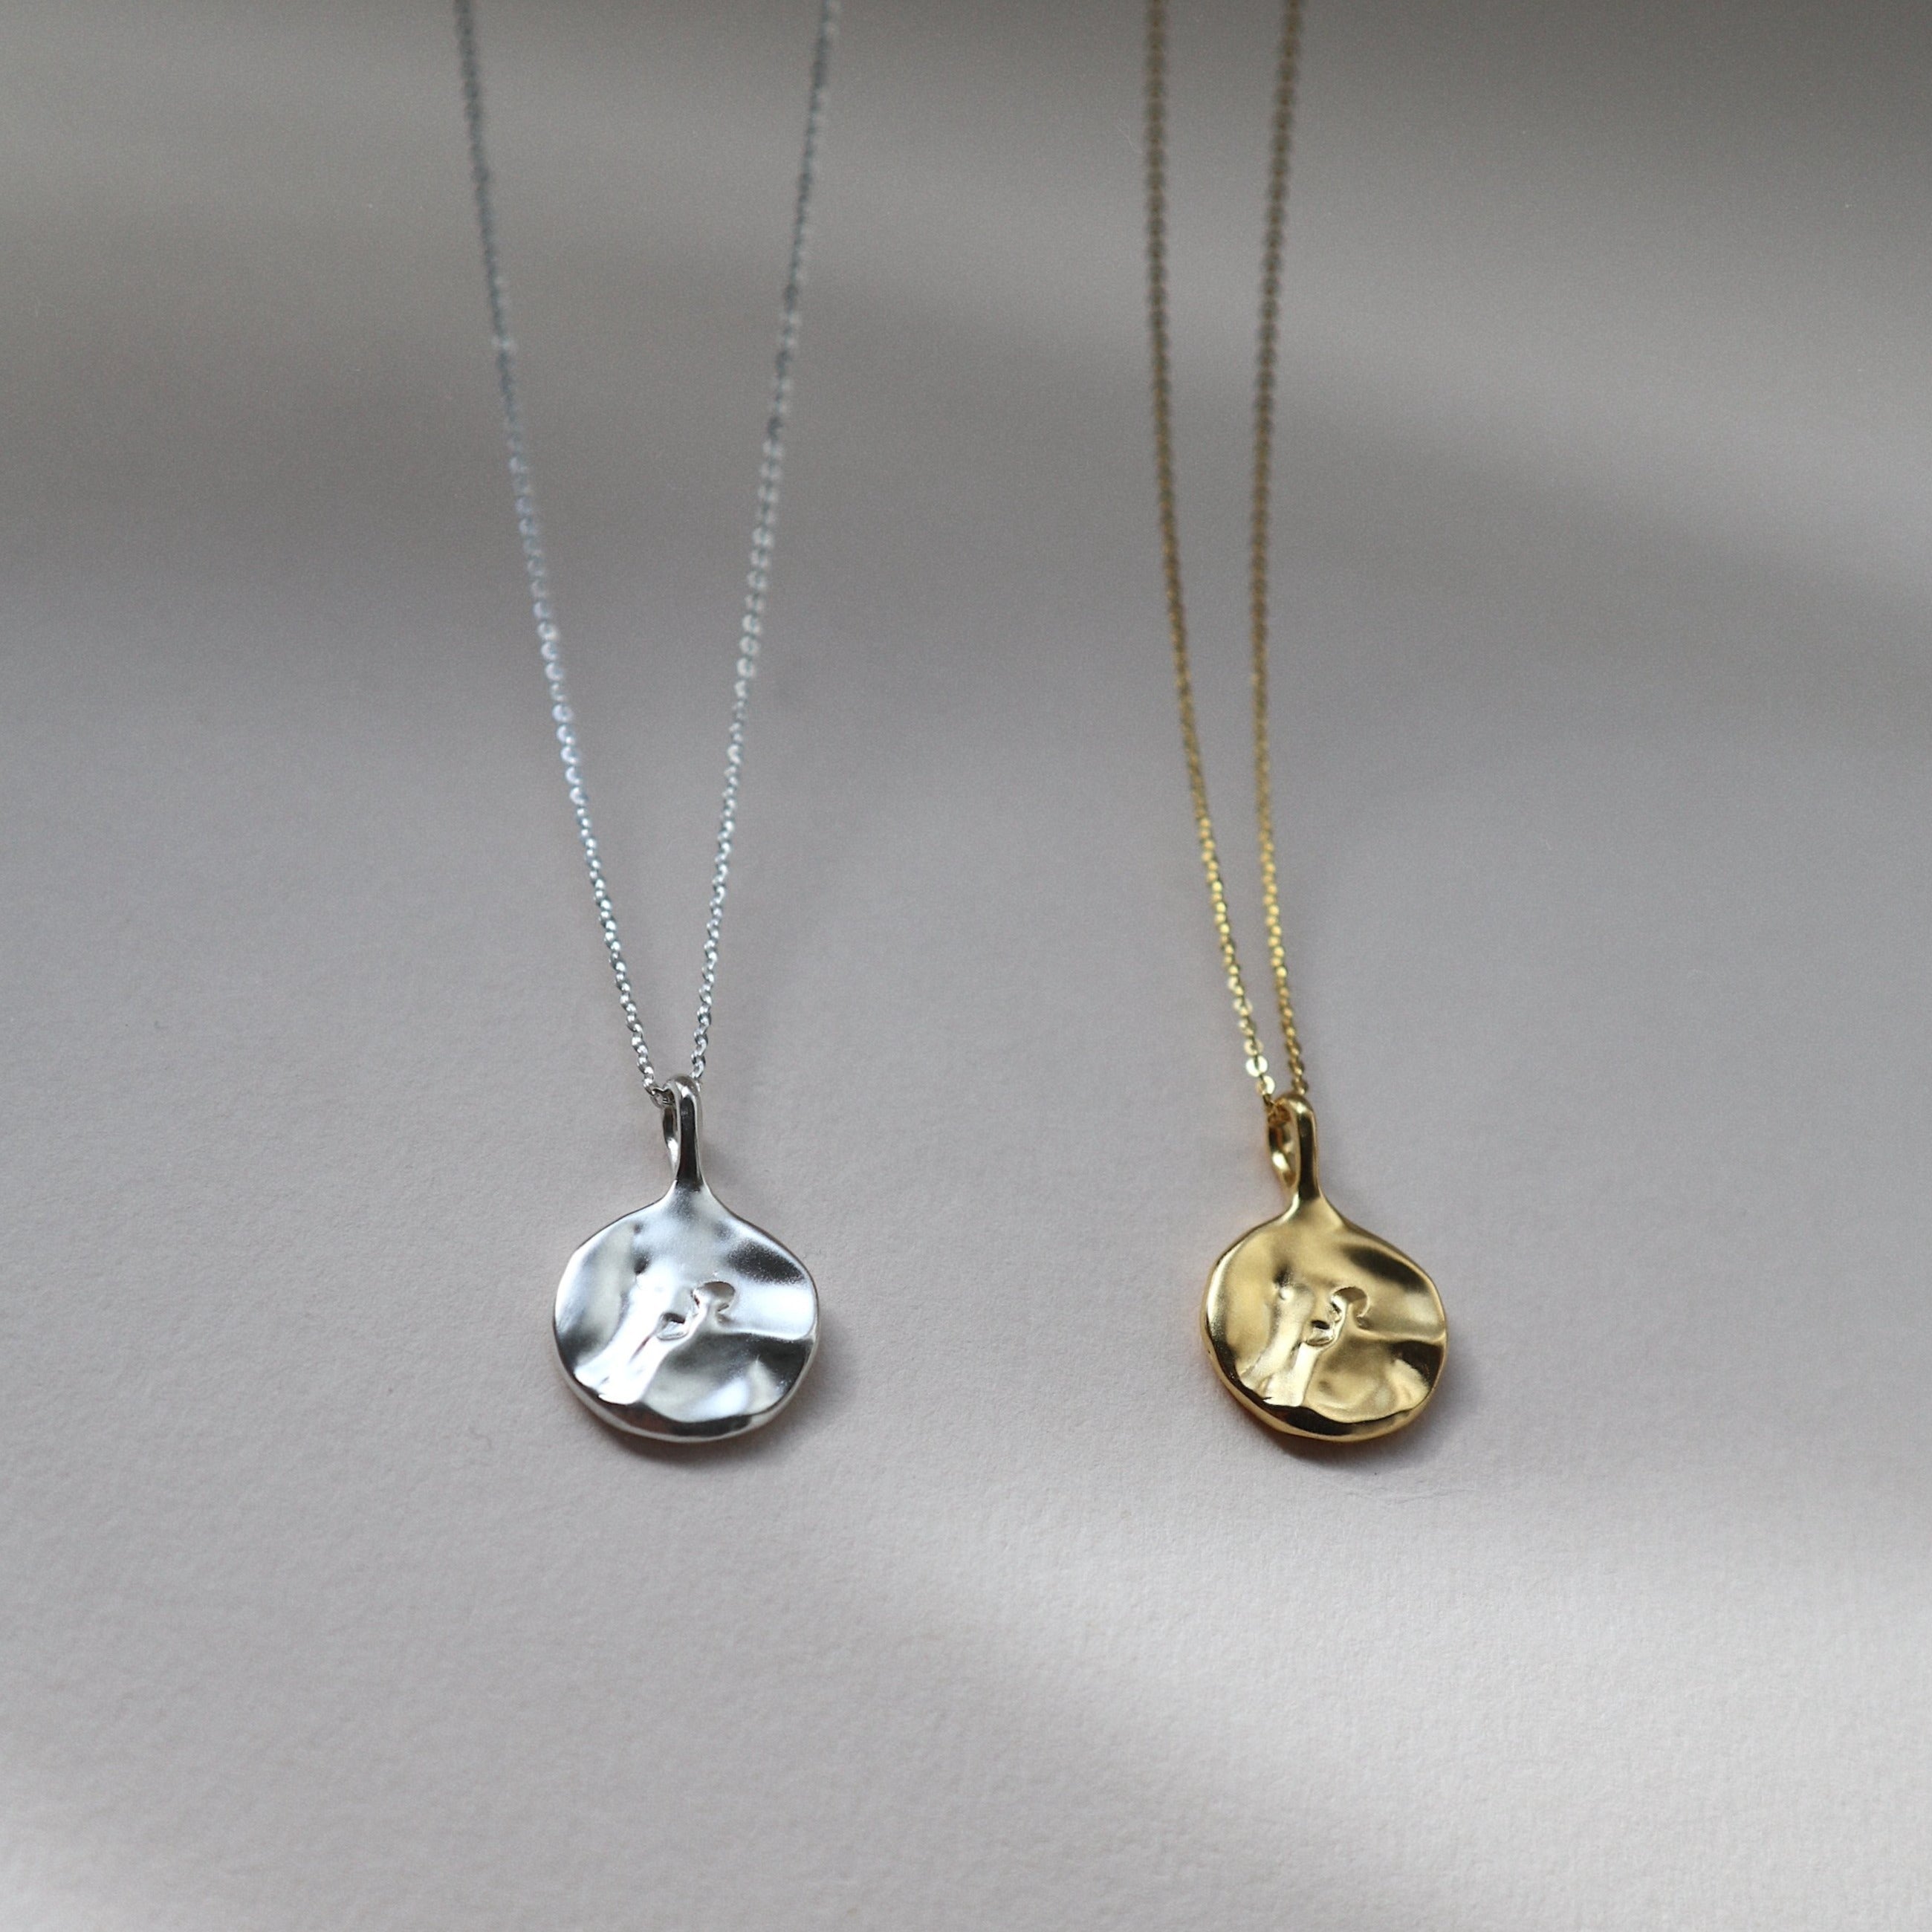 Oceane Drip Pendant in sterling Silver and 18k gold plating